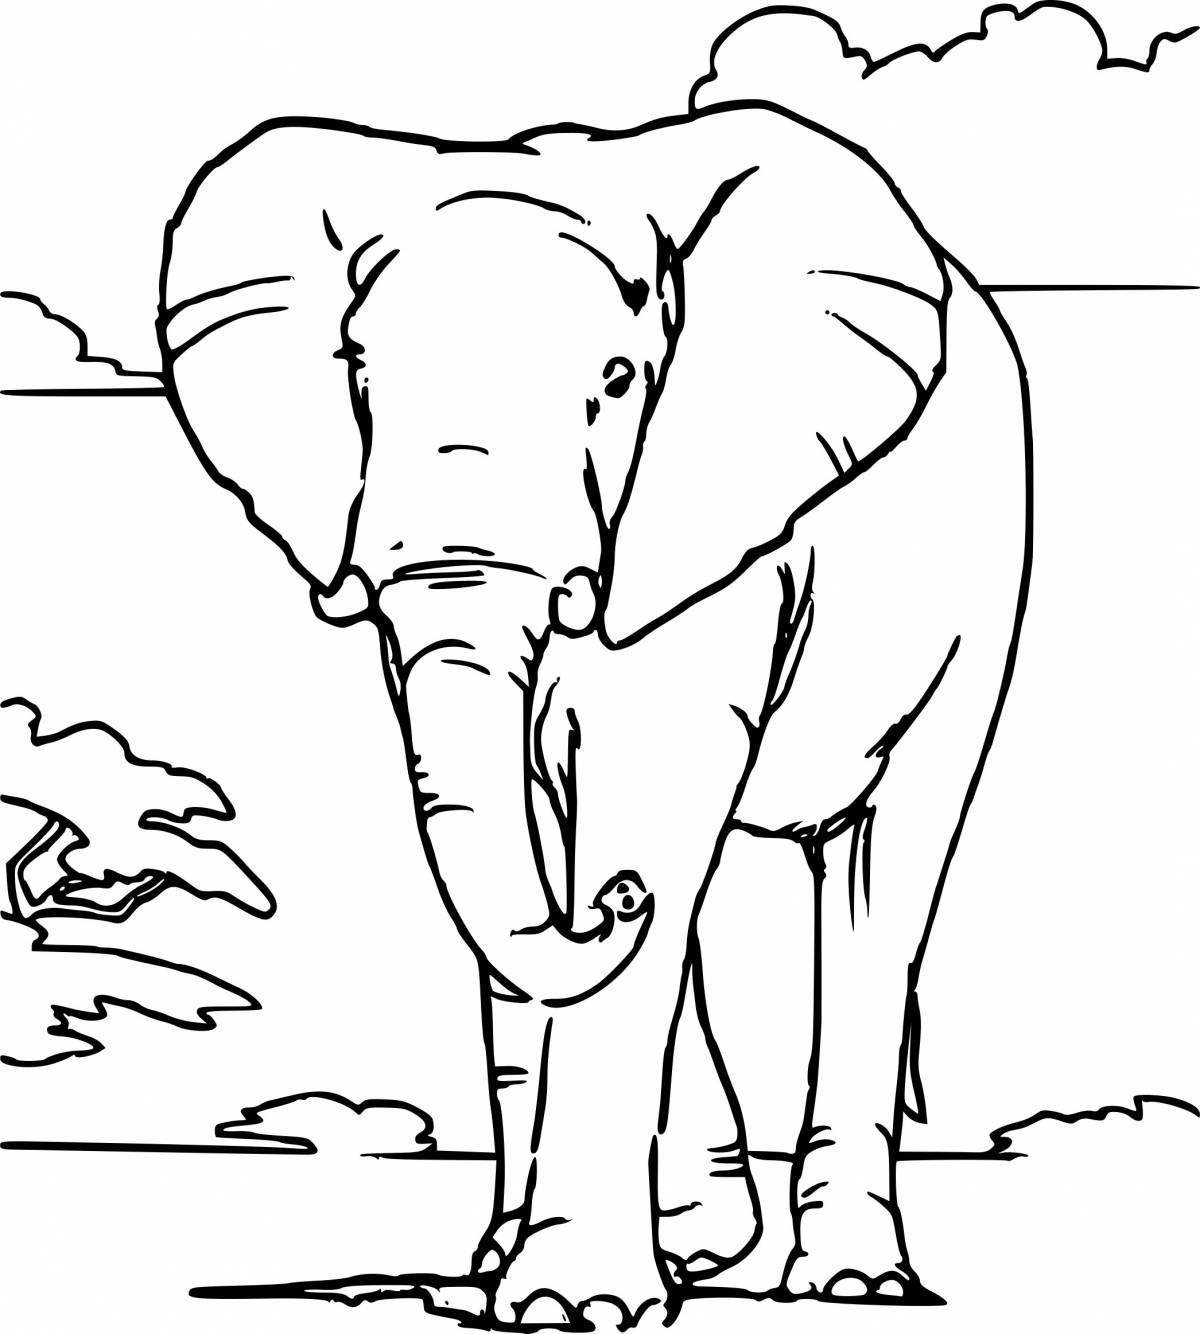 Coloring book royal indian elephant